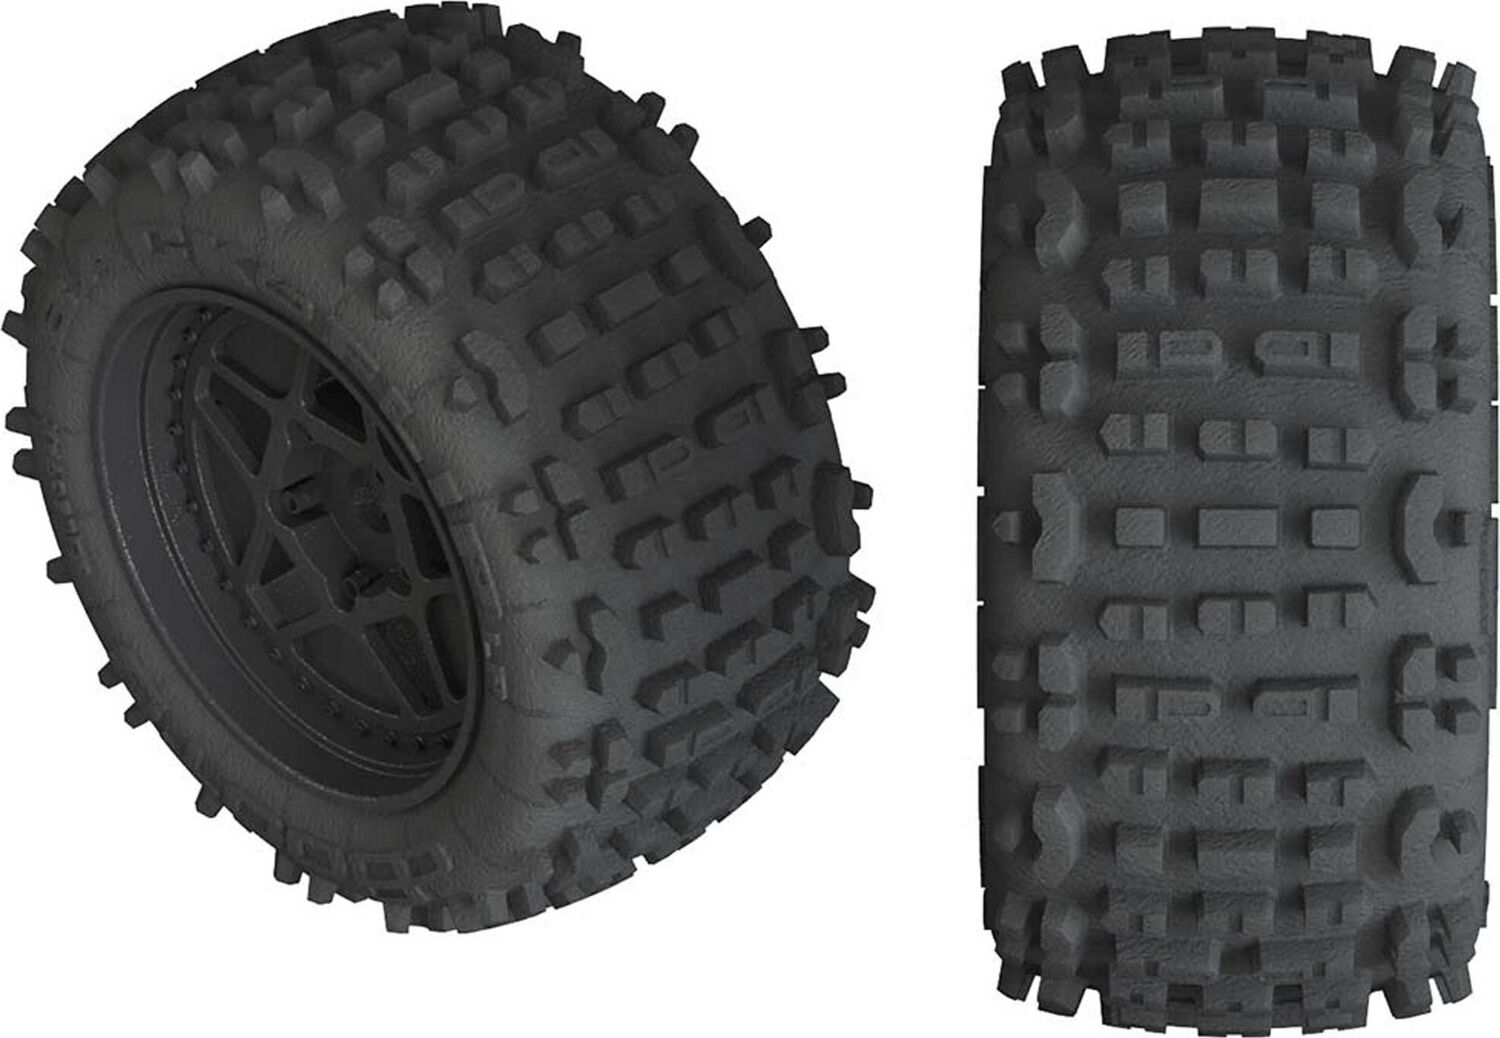 dBoots Hoons 53/107 2.9 Pre-Mounted Belted Tires, White, 17mm Hex, 5-S